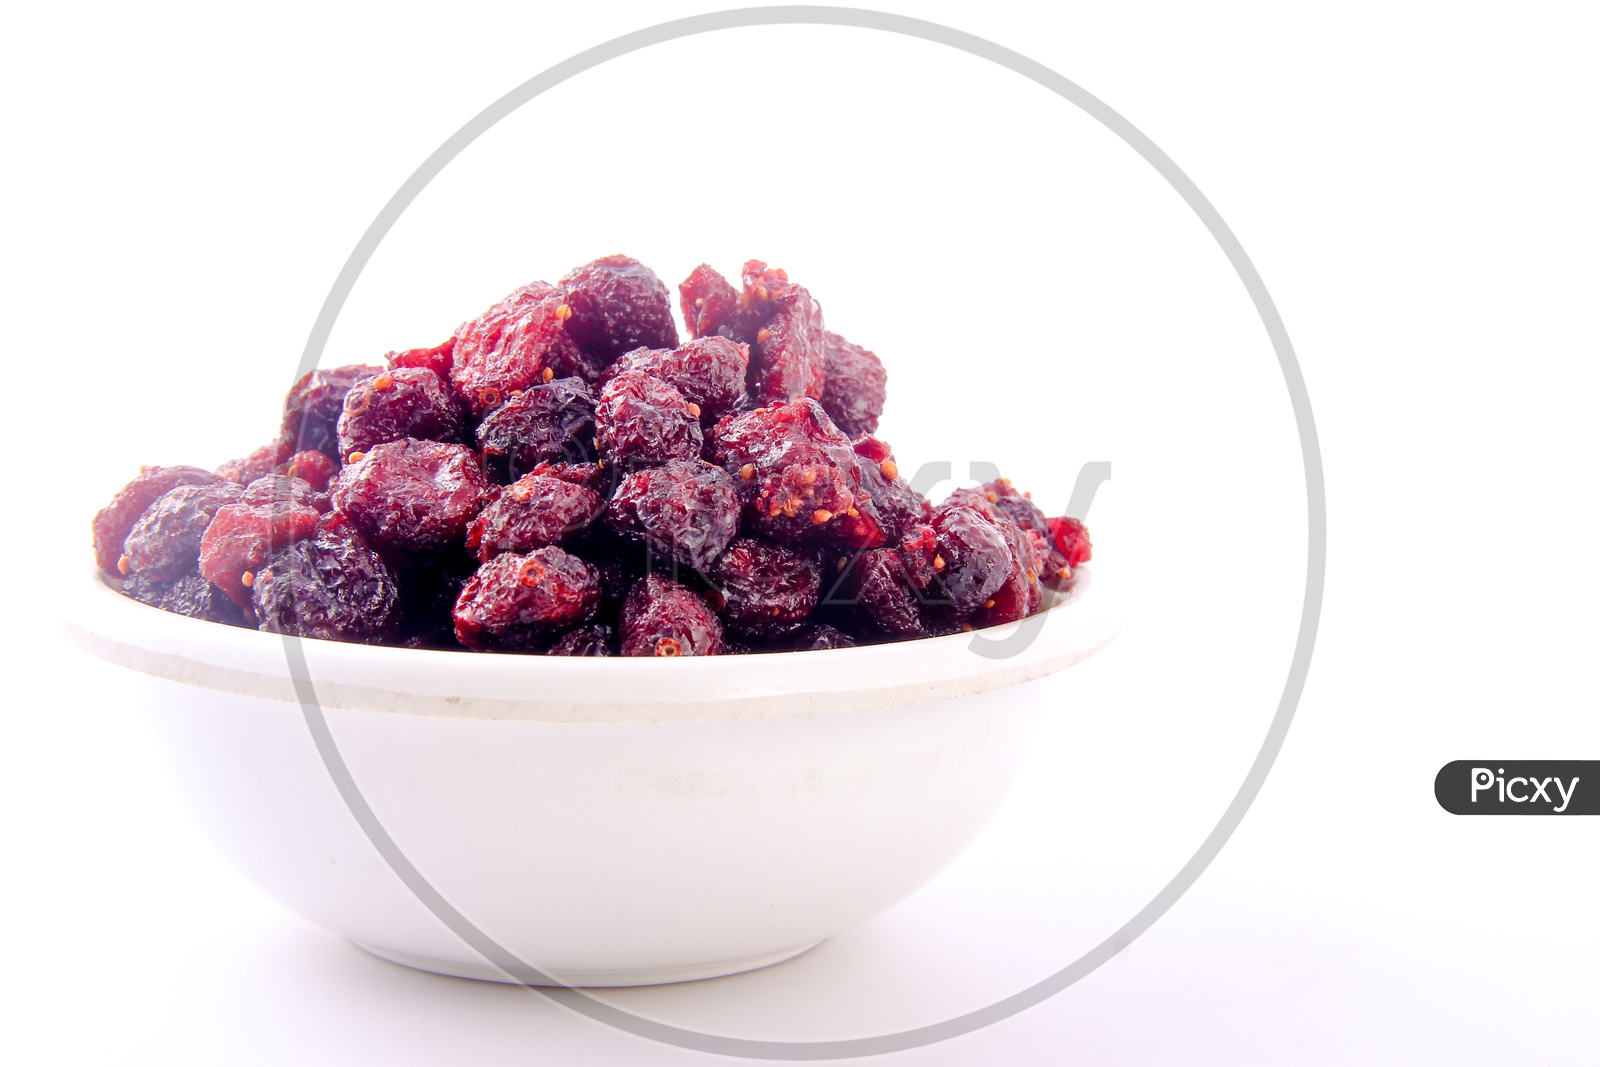 Dried Red berries In a Bowl On an Isolated White Background